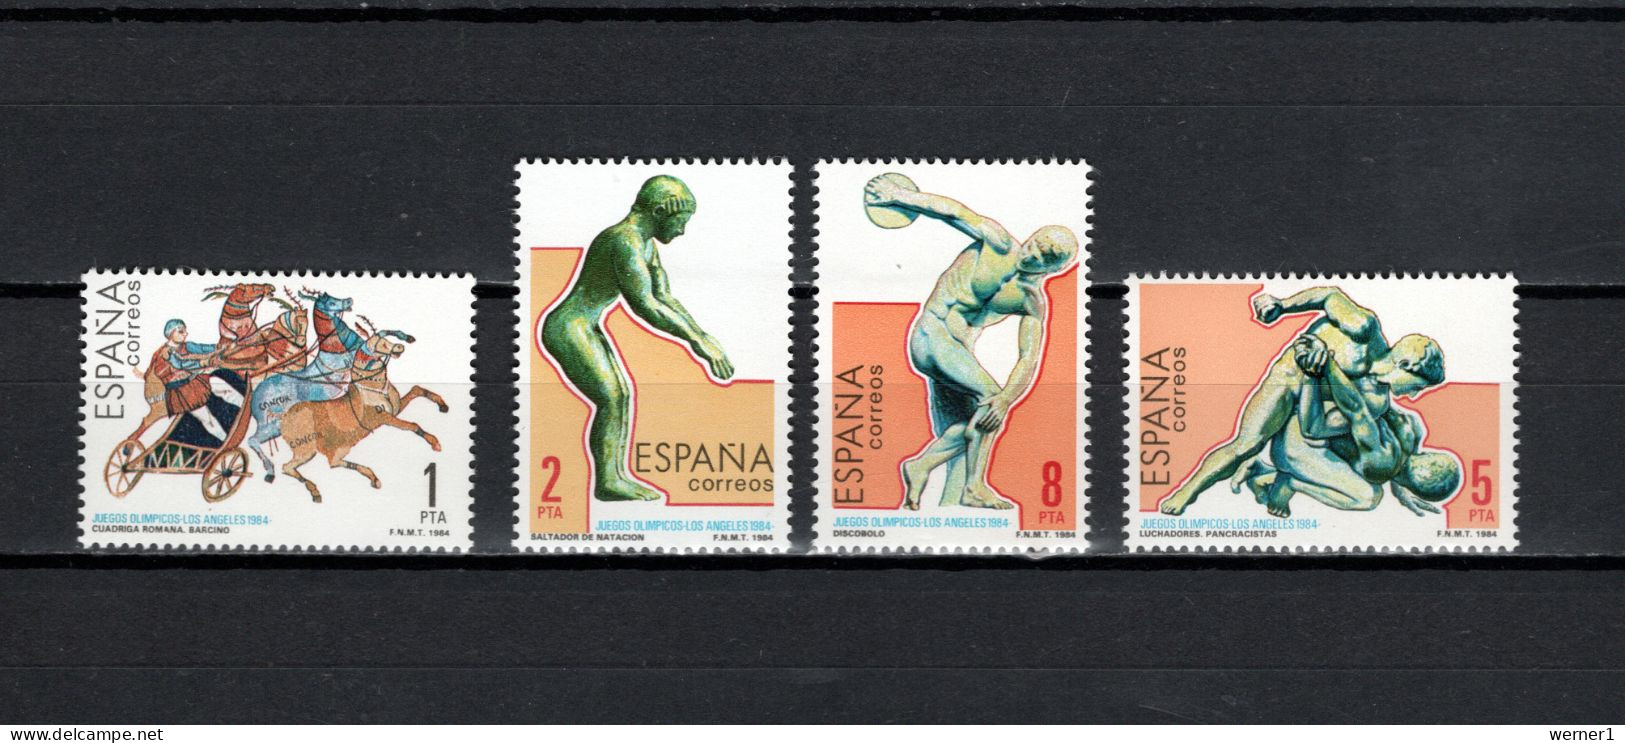 Spain 1984 Olympic Games Los Angeles, Wrestling Etc. Set Of 4 MNH - Sommer 1984: Los Angeles